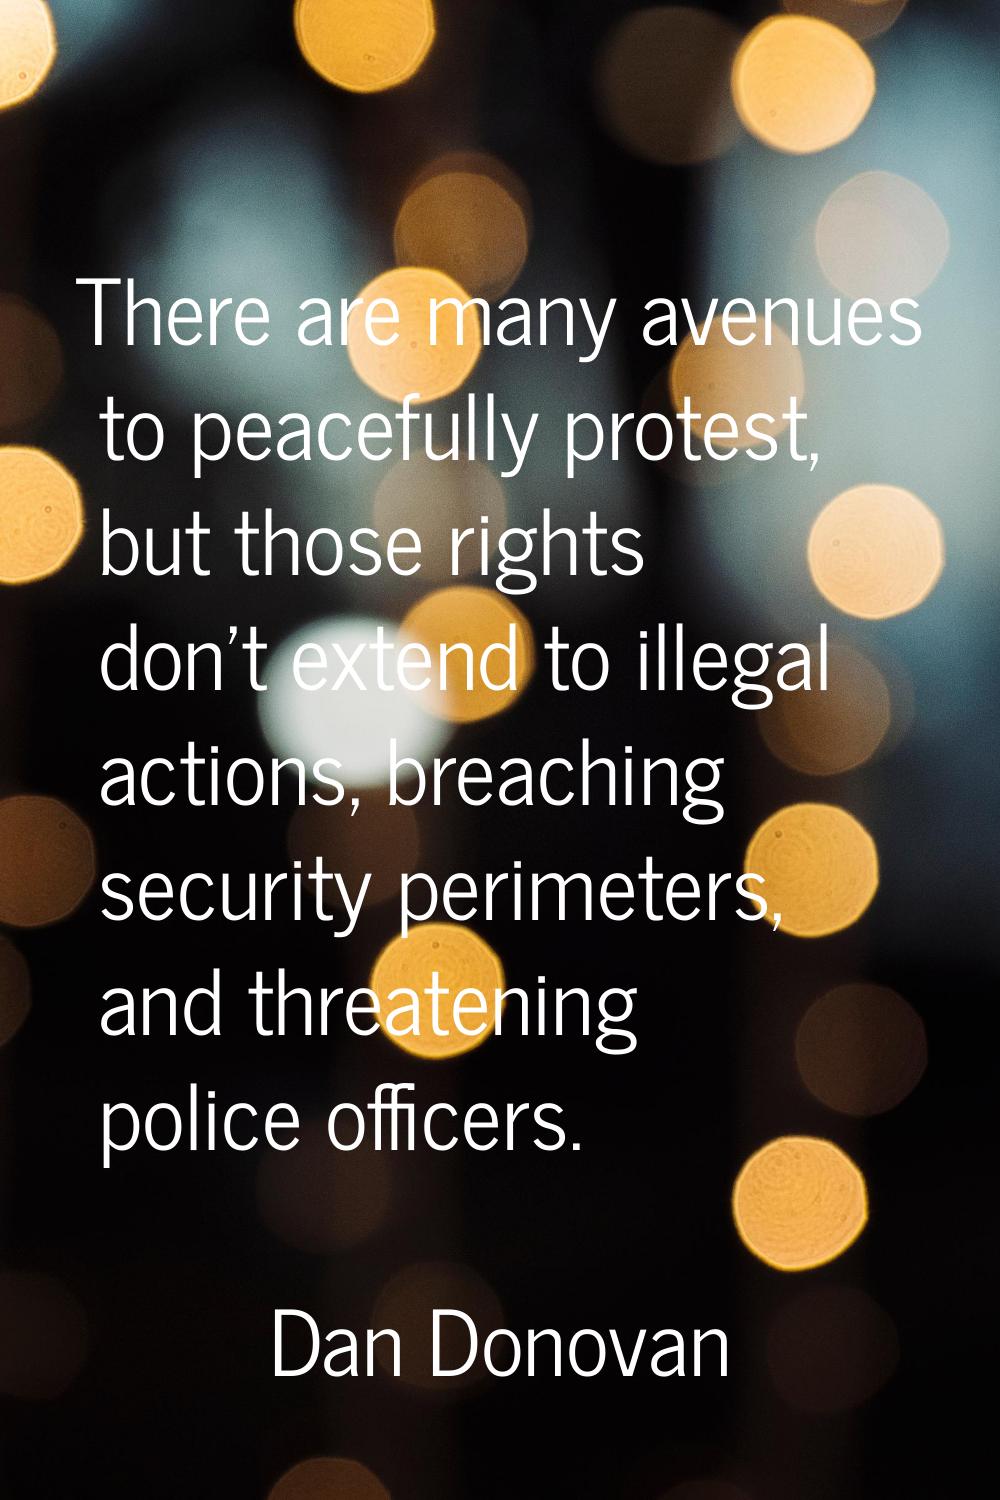 There are many avenues to peacefully protest, but those rights don't extend to illegal actions, bre